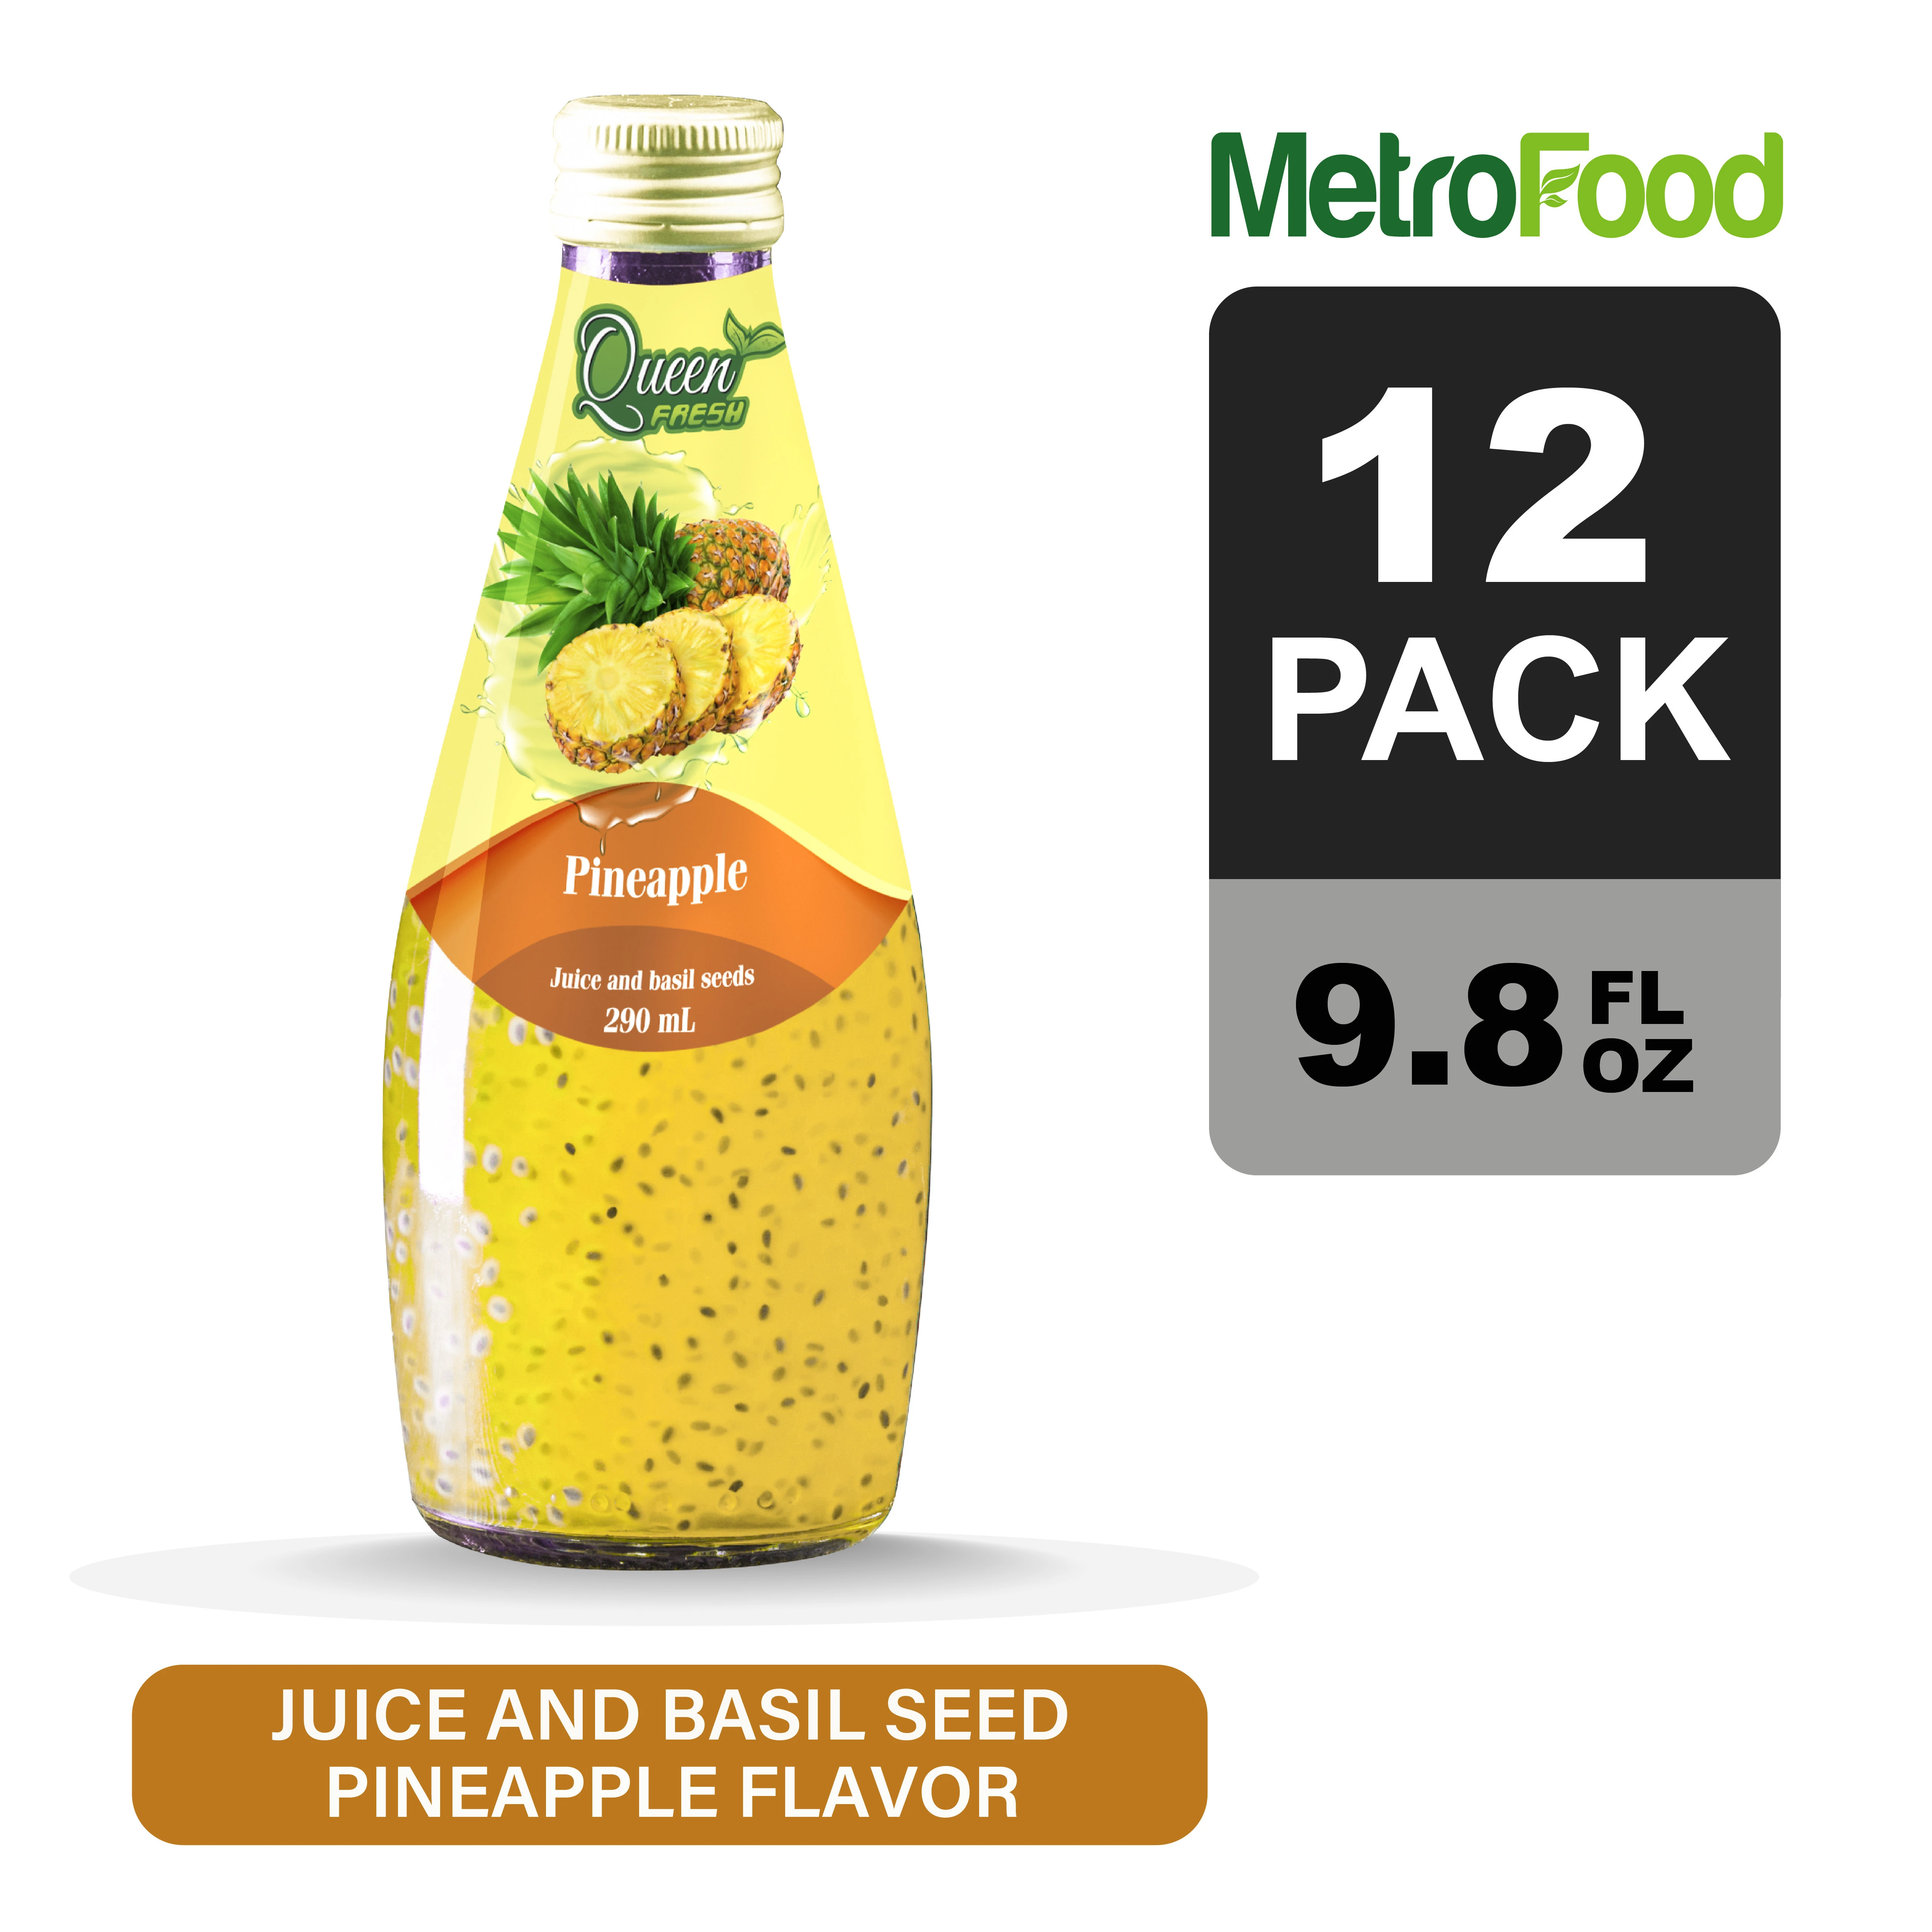 OEM/ODM/Private Label - 290ml High Quality Basil Seed Drink from Vietnam - Pineapple Flavor